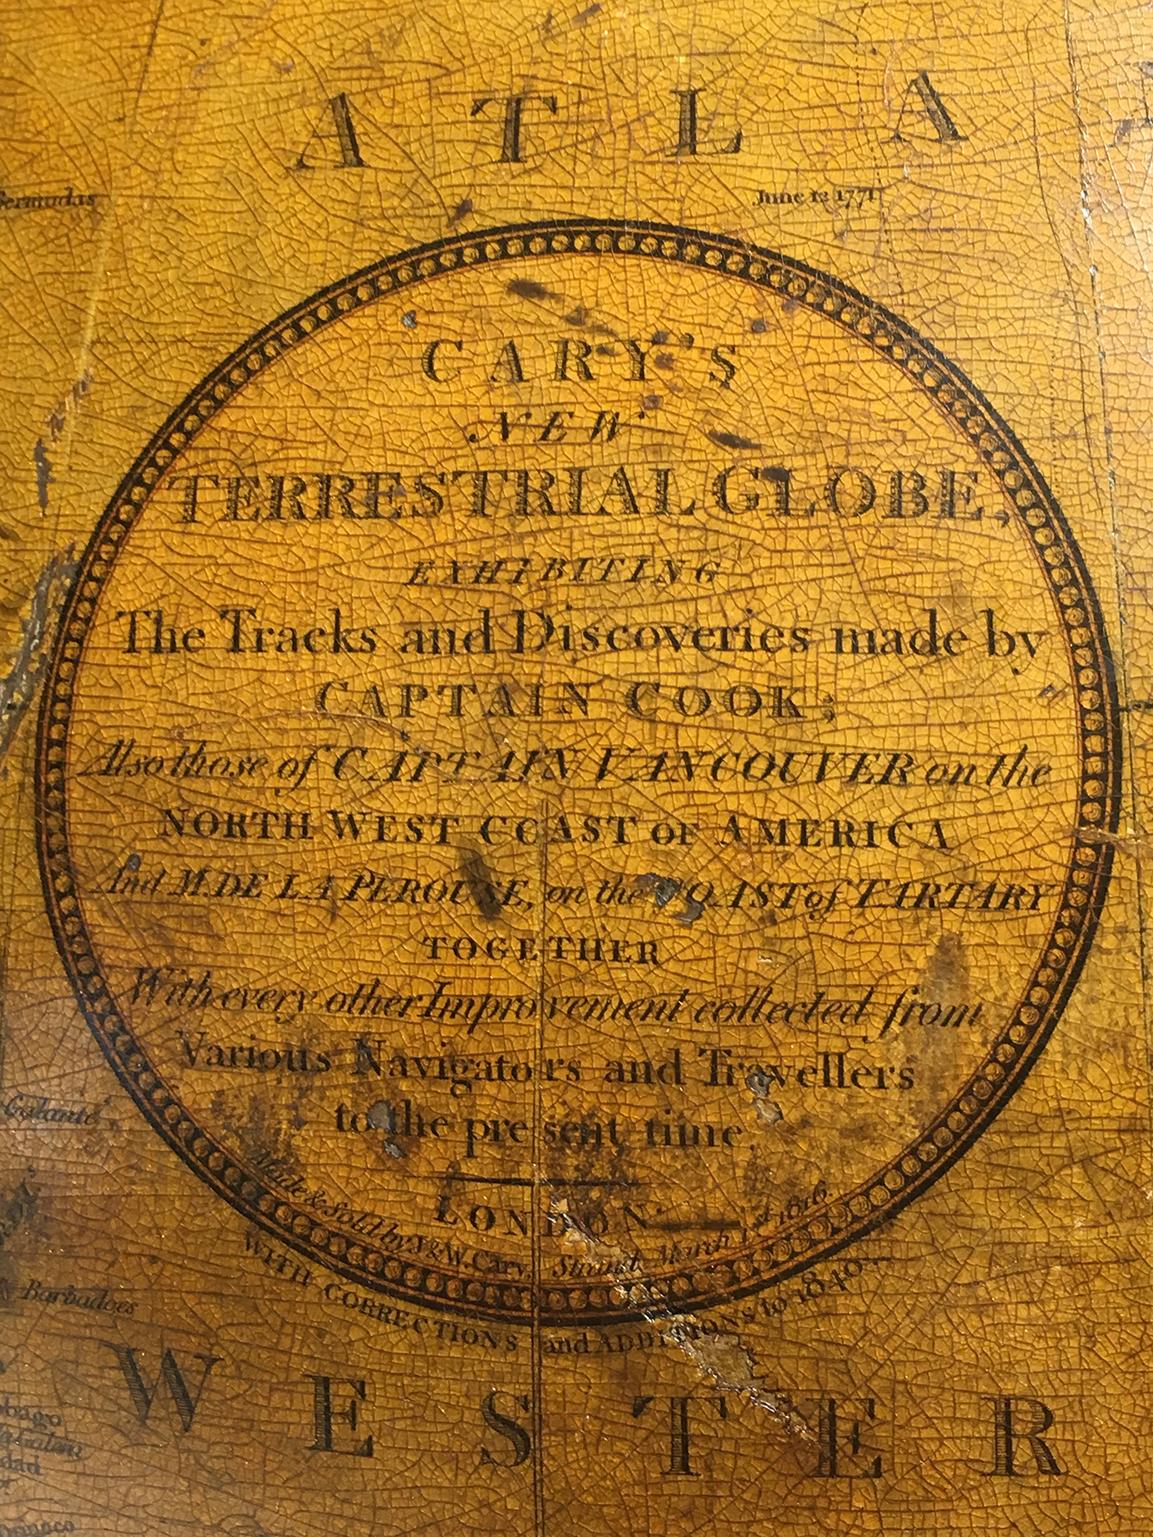 John and William Cary
Updated by George and John Cary
Terrestrial Globe
London, 1840

lb 22 (kg 10)

Slight surface abrasions due to use. A small crack on the horizon circle.

The globe rests in its original Dutch style stand with four supporting